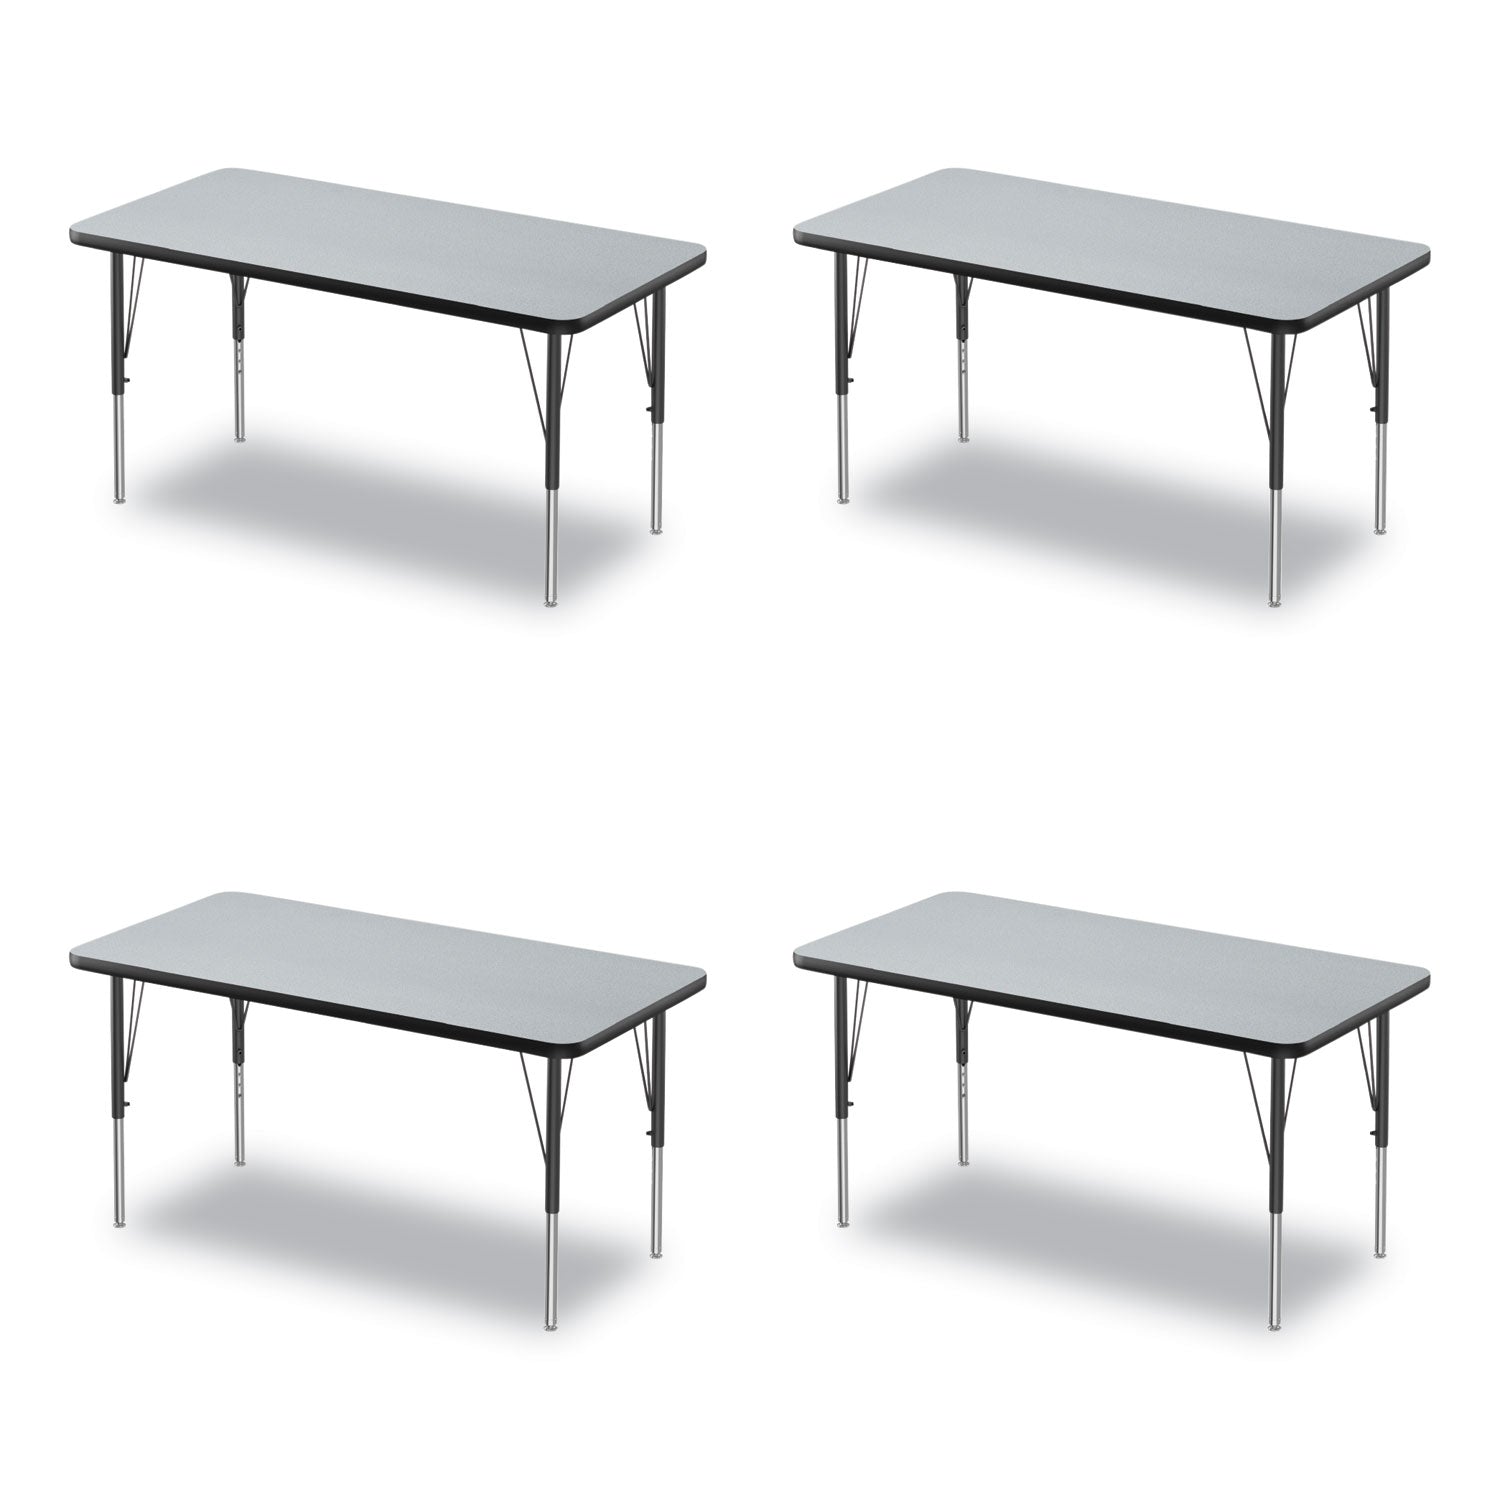 adjustable-activity-table-rectangular-48-x-24-x-19-to-29-granite-top-black-legs-4-pallet-ships-in-4-6-business-days_crl2448tf1595k4 - 1